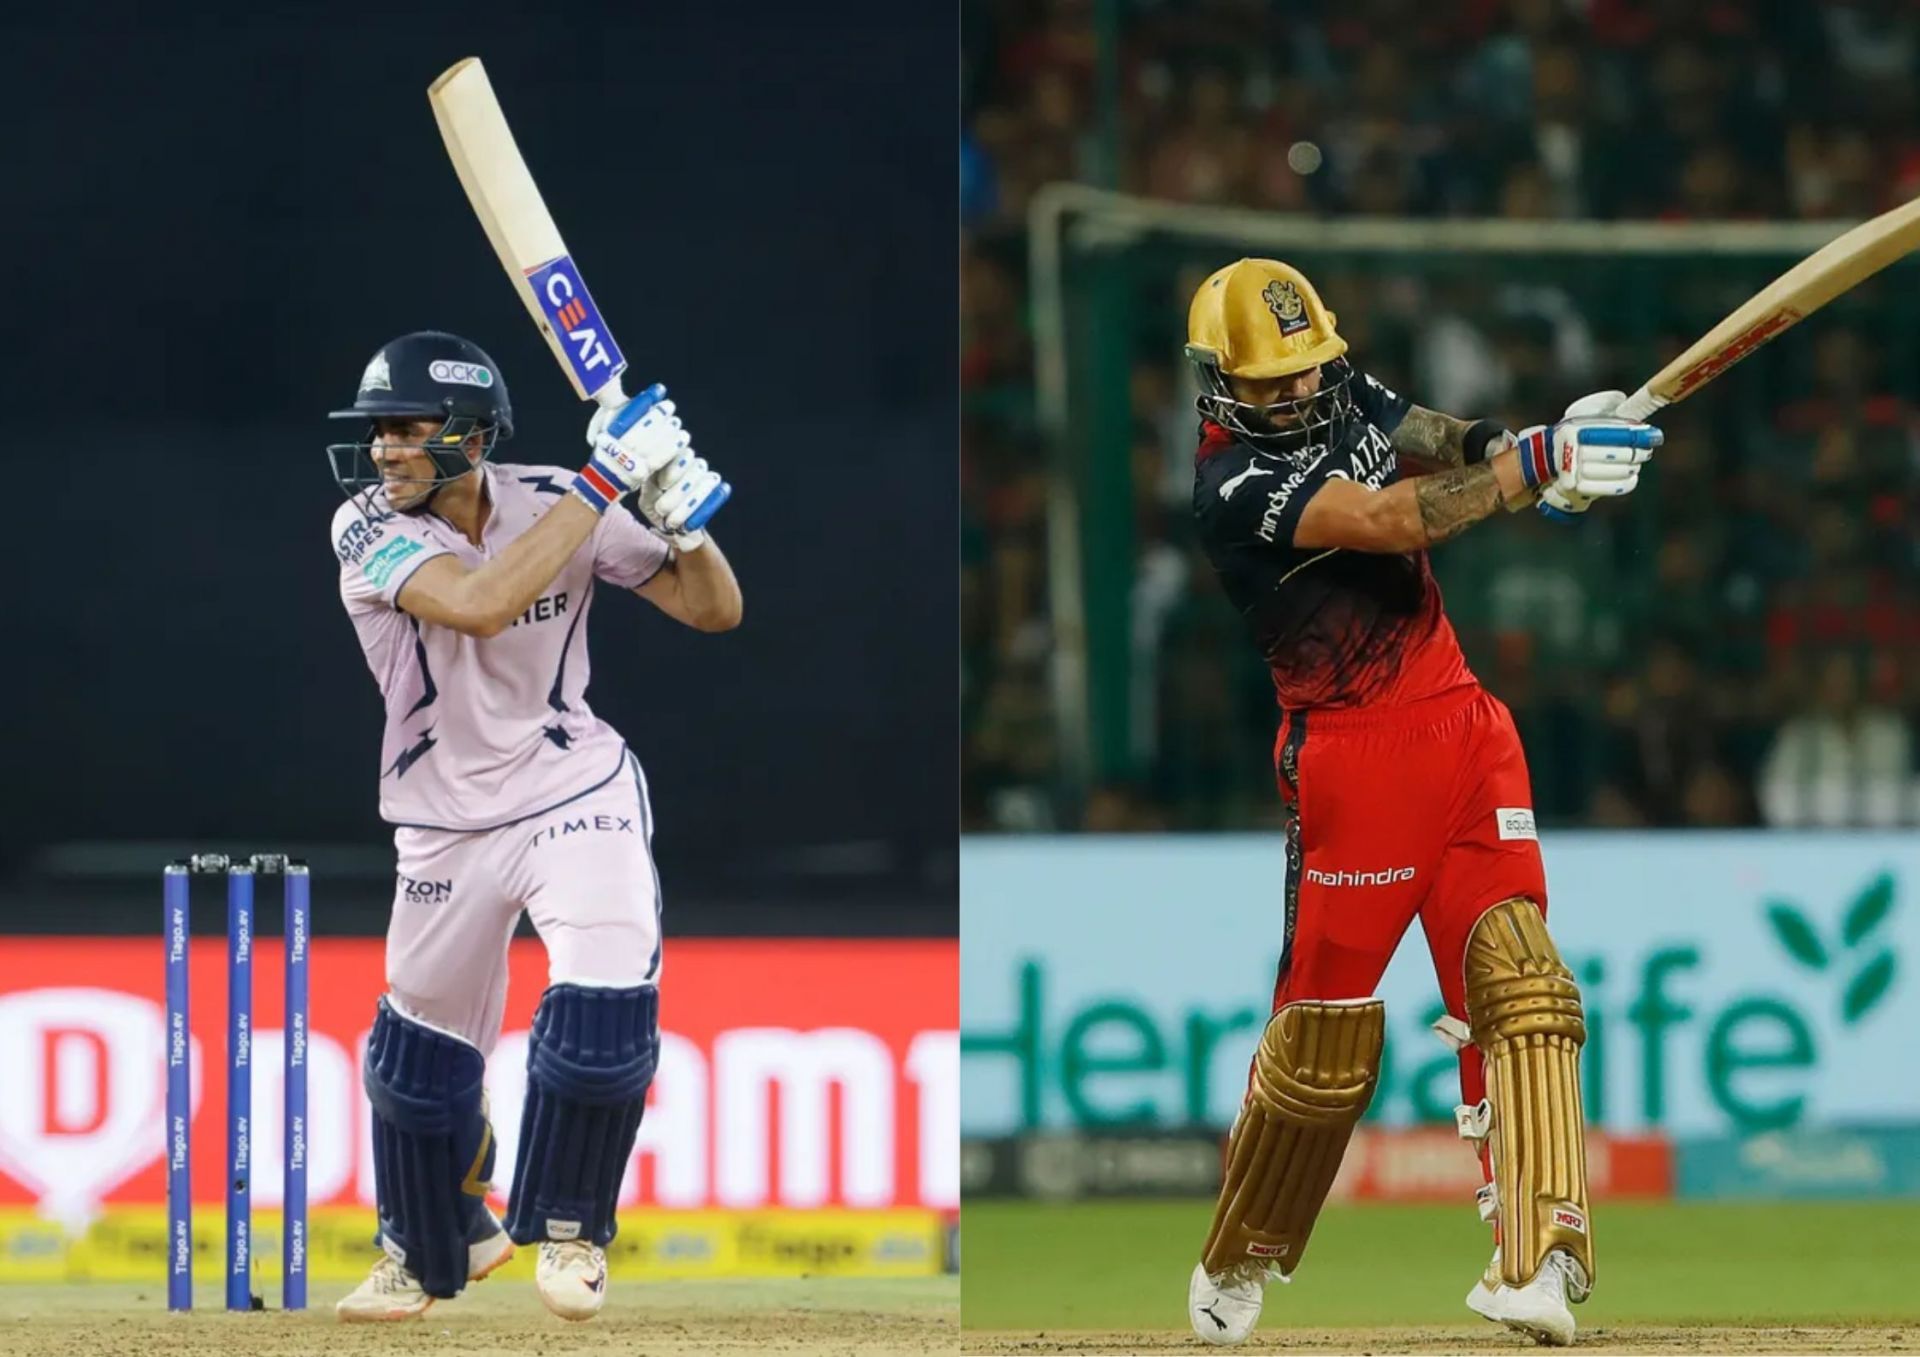 Shubman Gill and Virat Kohli were at their irrepressible best in the week gone by in IPL 2023 (Picture Credits: BCCI).